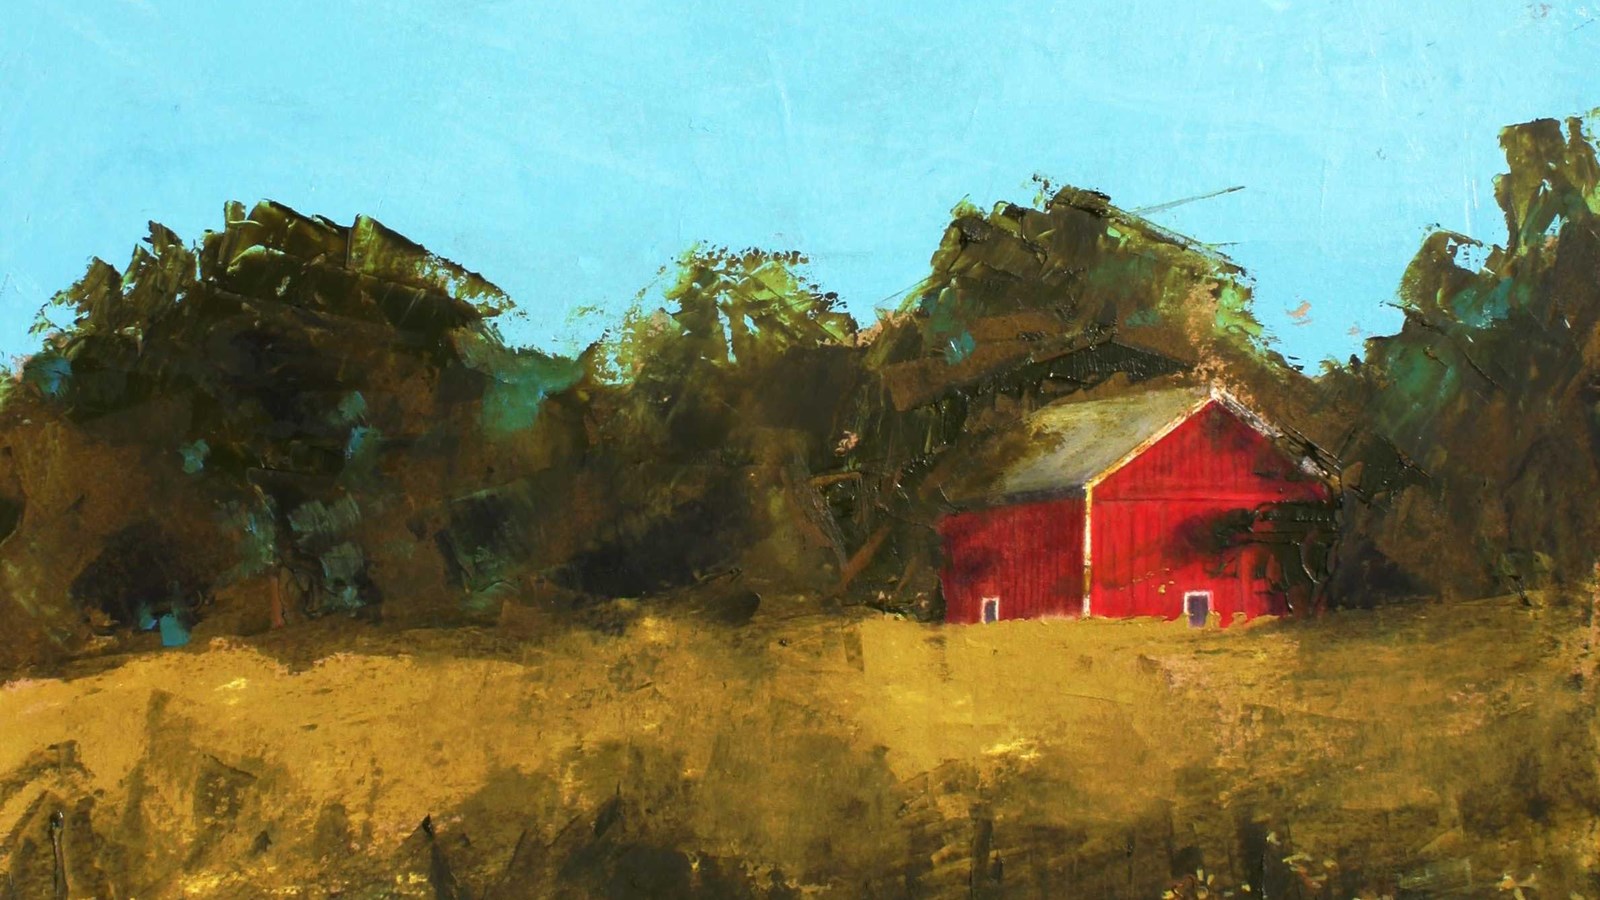 A painting depicts a red barn shaded by trees as seen from the golden tallgrass prairie.